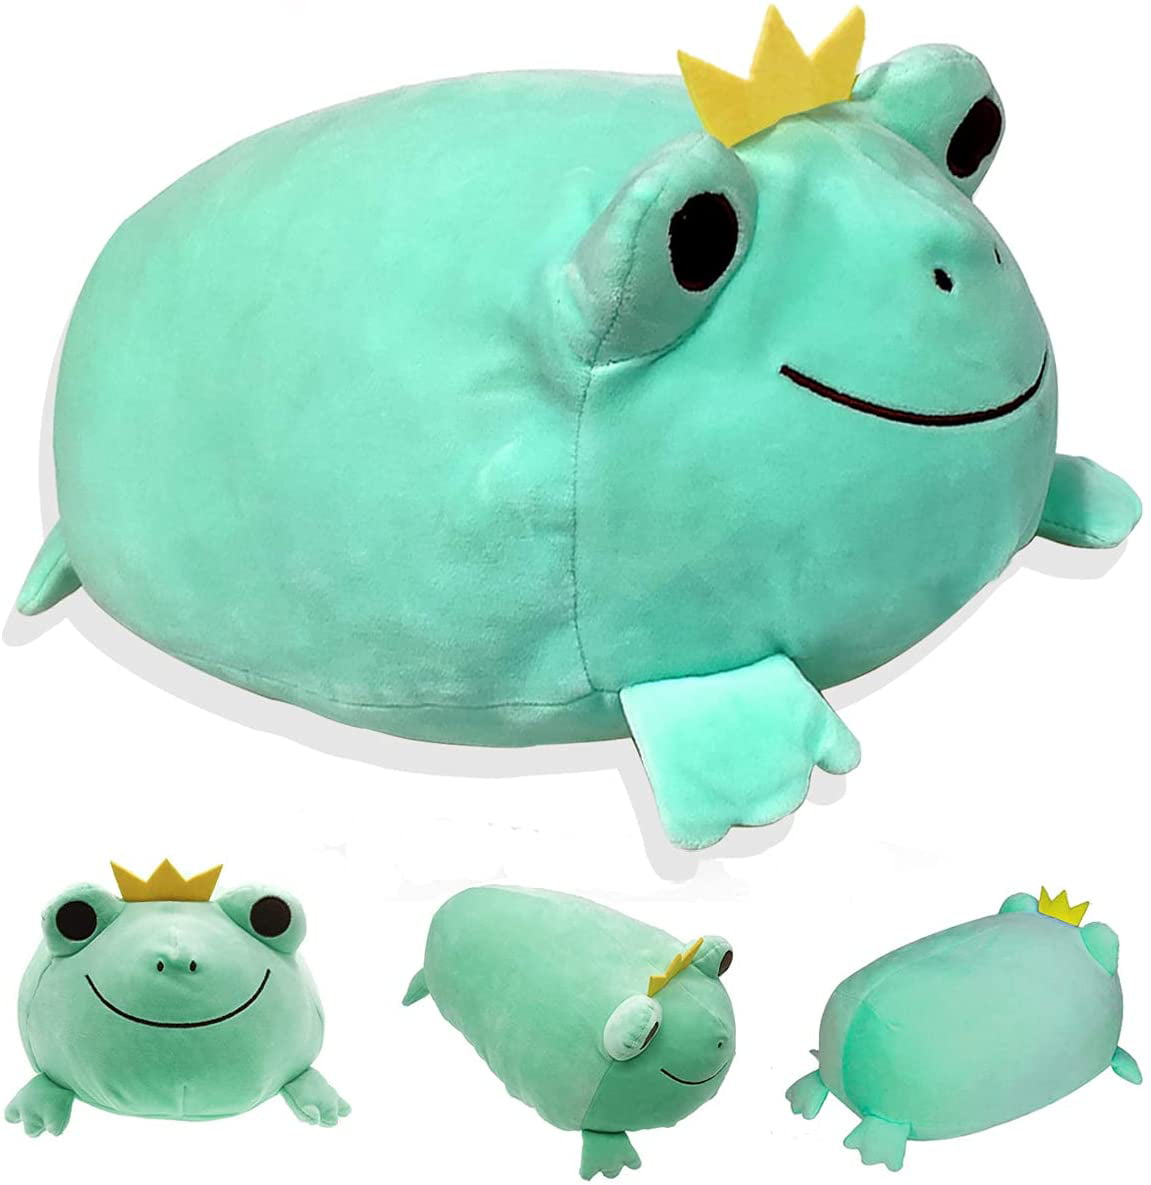 Frog Plushie Toy Gift for Kids Toddlers Grils Boys Children Green Frog 14 inch ROCHEMON Cute Frog Plush Stuffed Animal,Soft Frog Plushie Hugging Pillow 